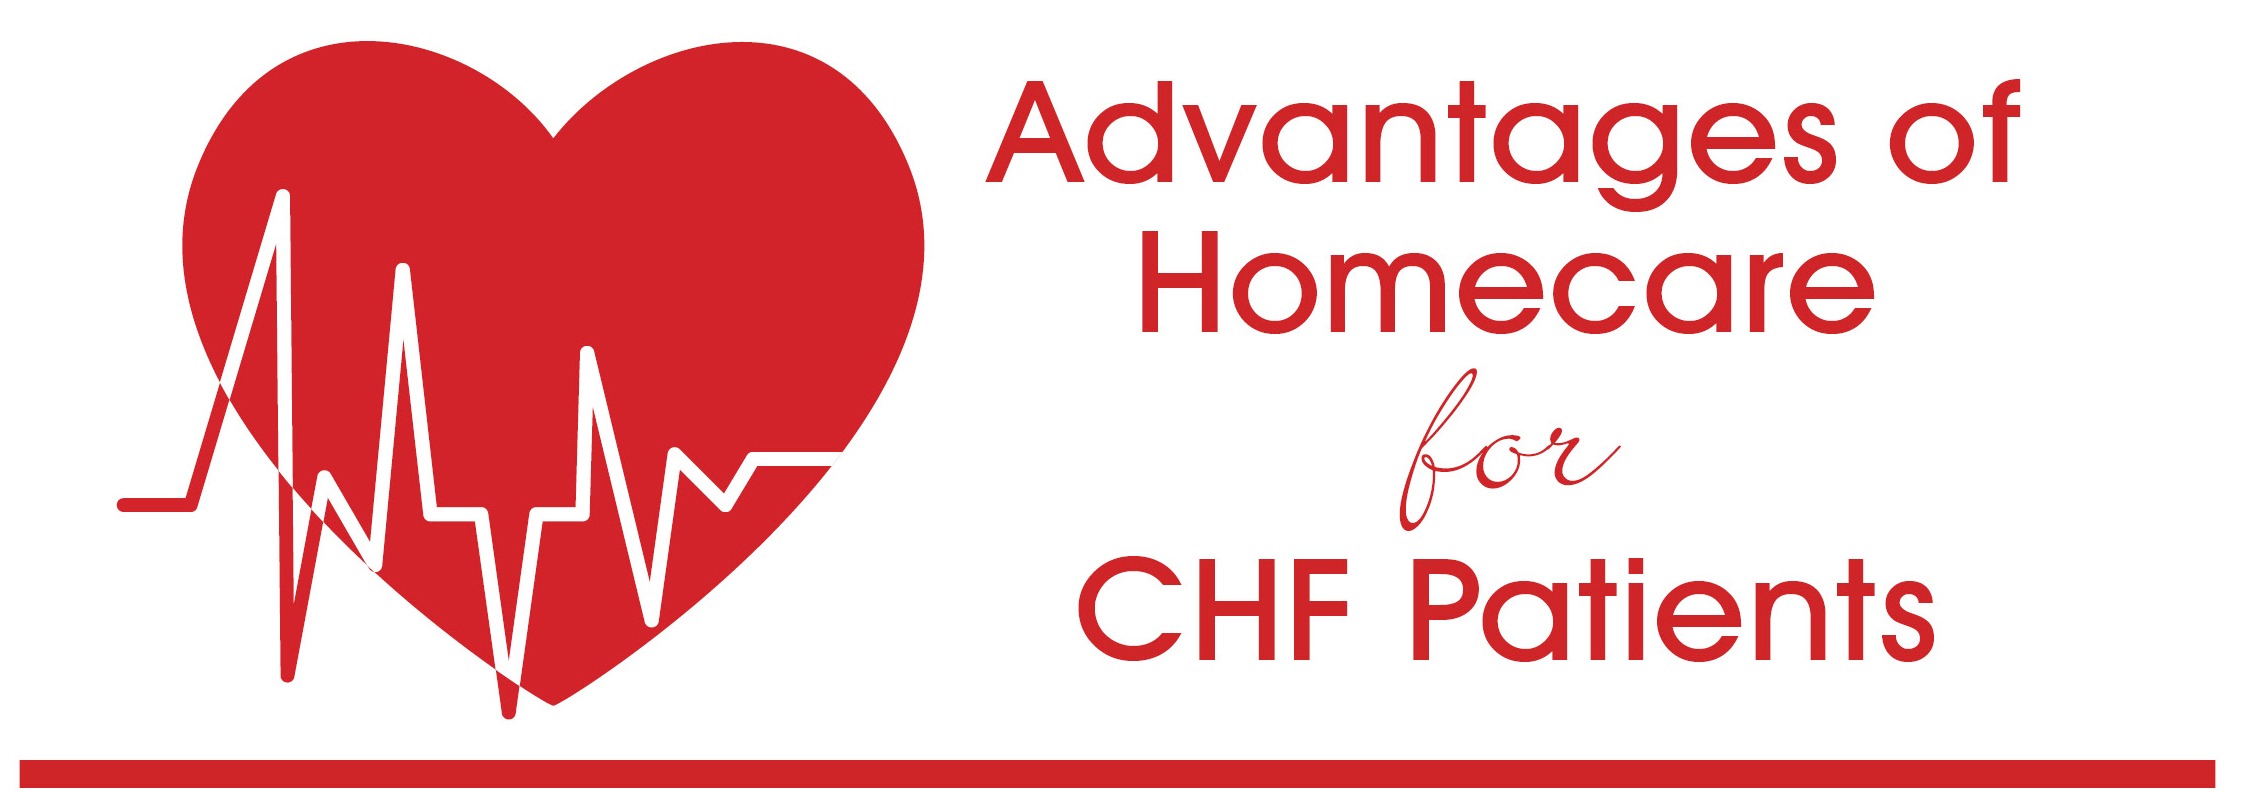 5 Advantages of Home Heath for CHF Patients